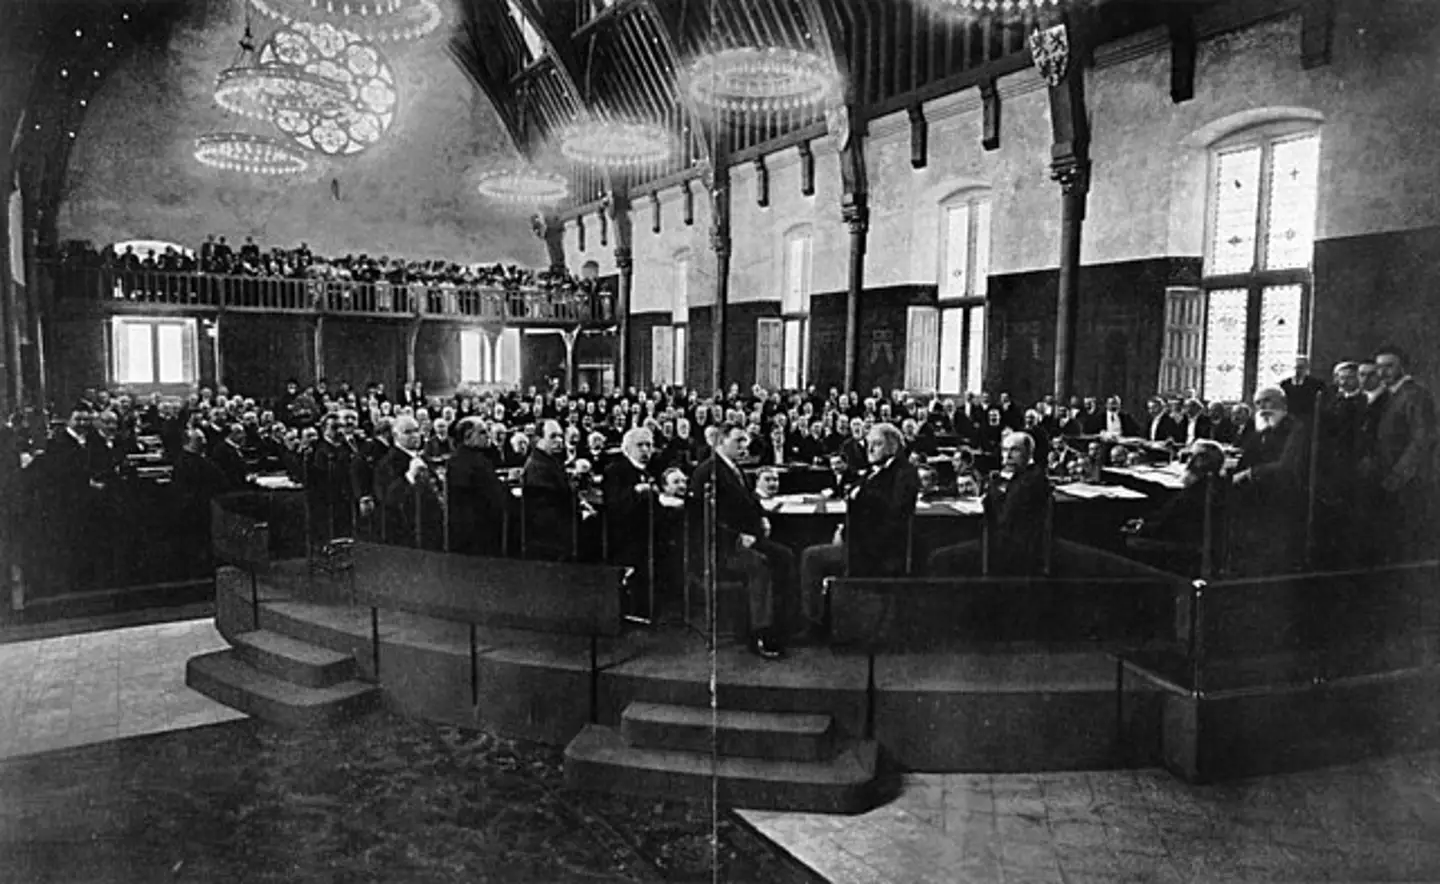 Picture taken during the Second Peace Conference at The Hague in 1907. (Wikipedia/Creative Commons CC BY-SA 3.0)